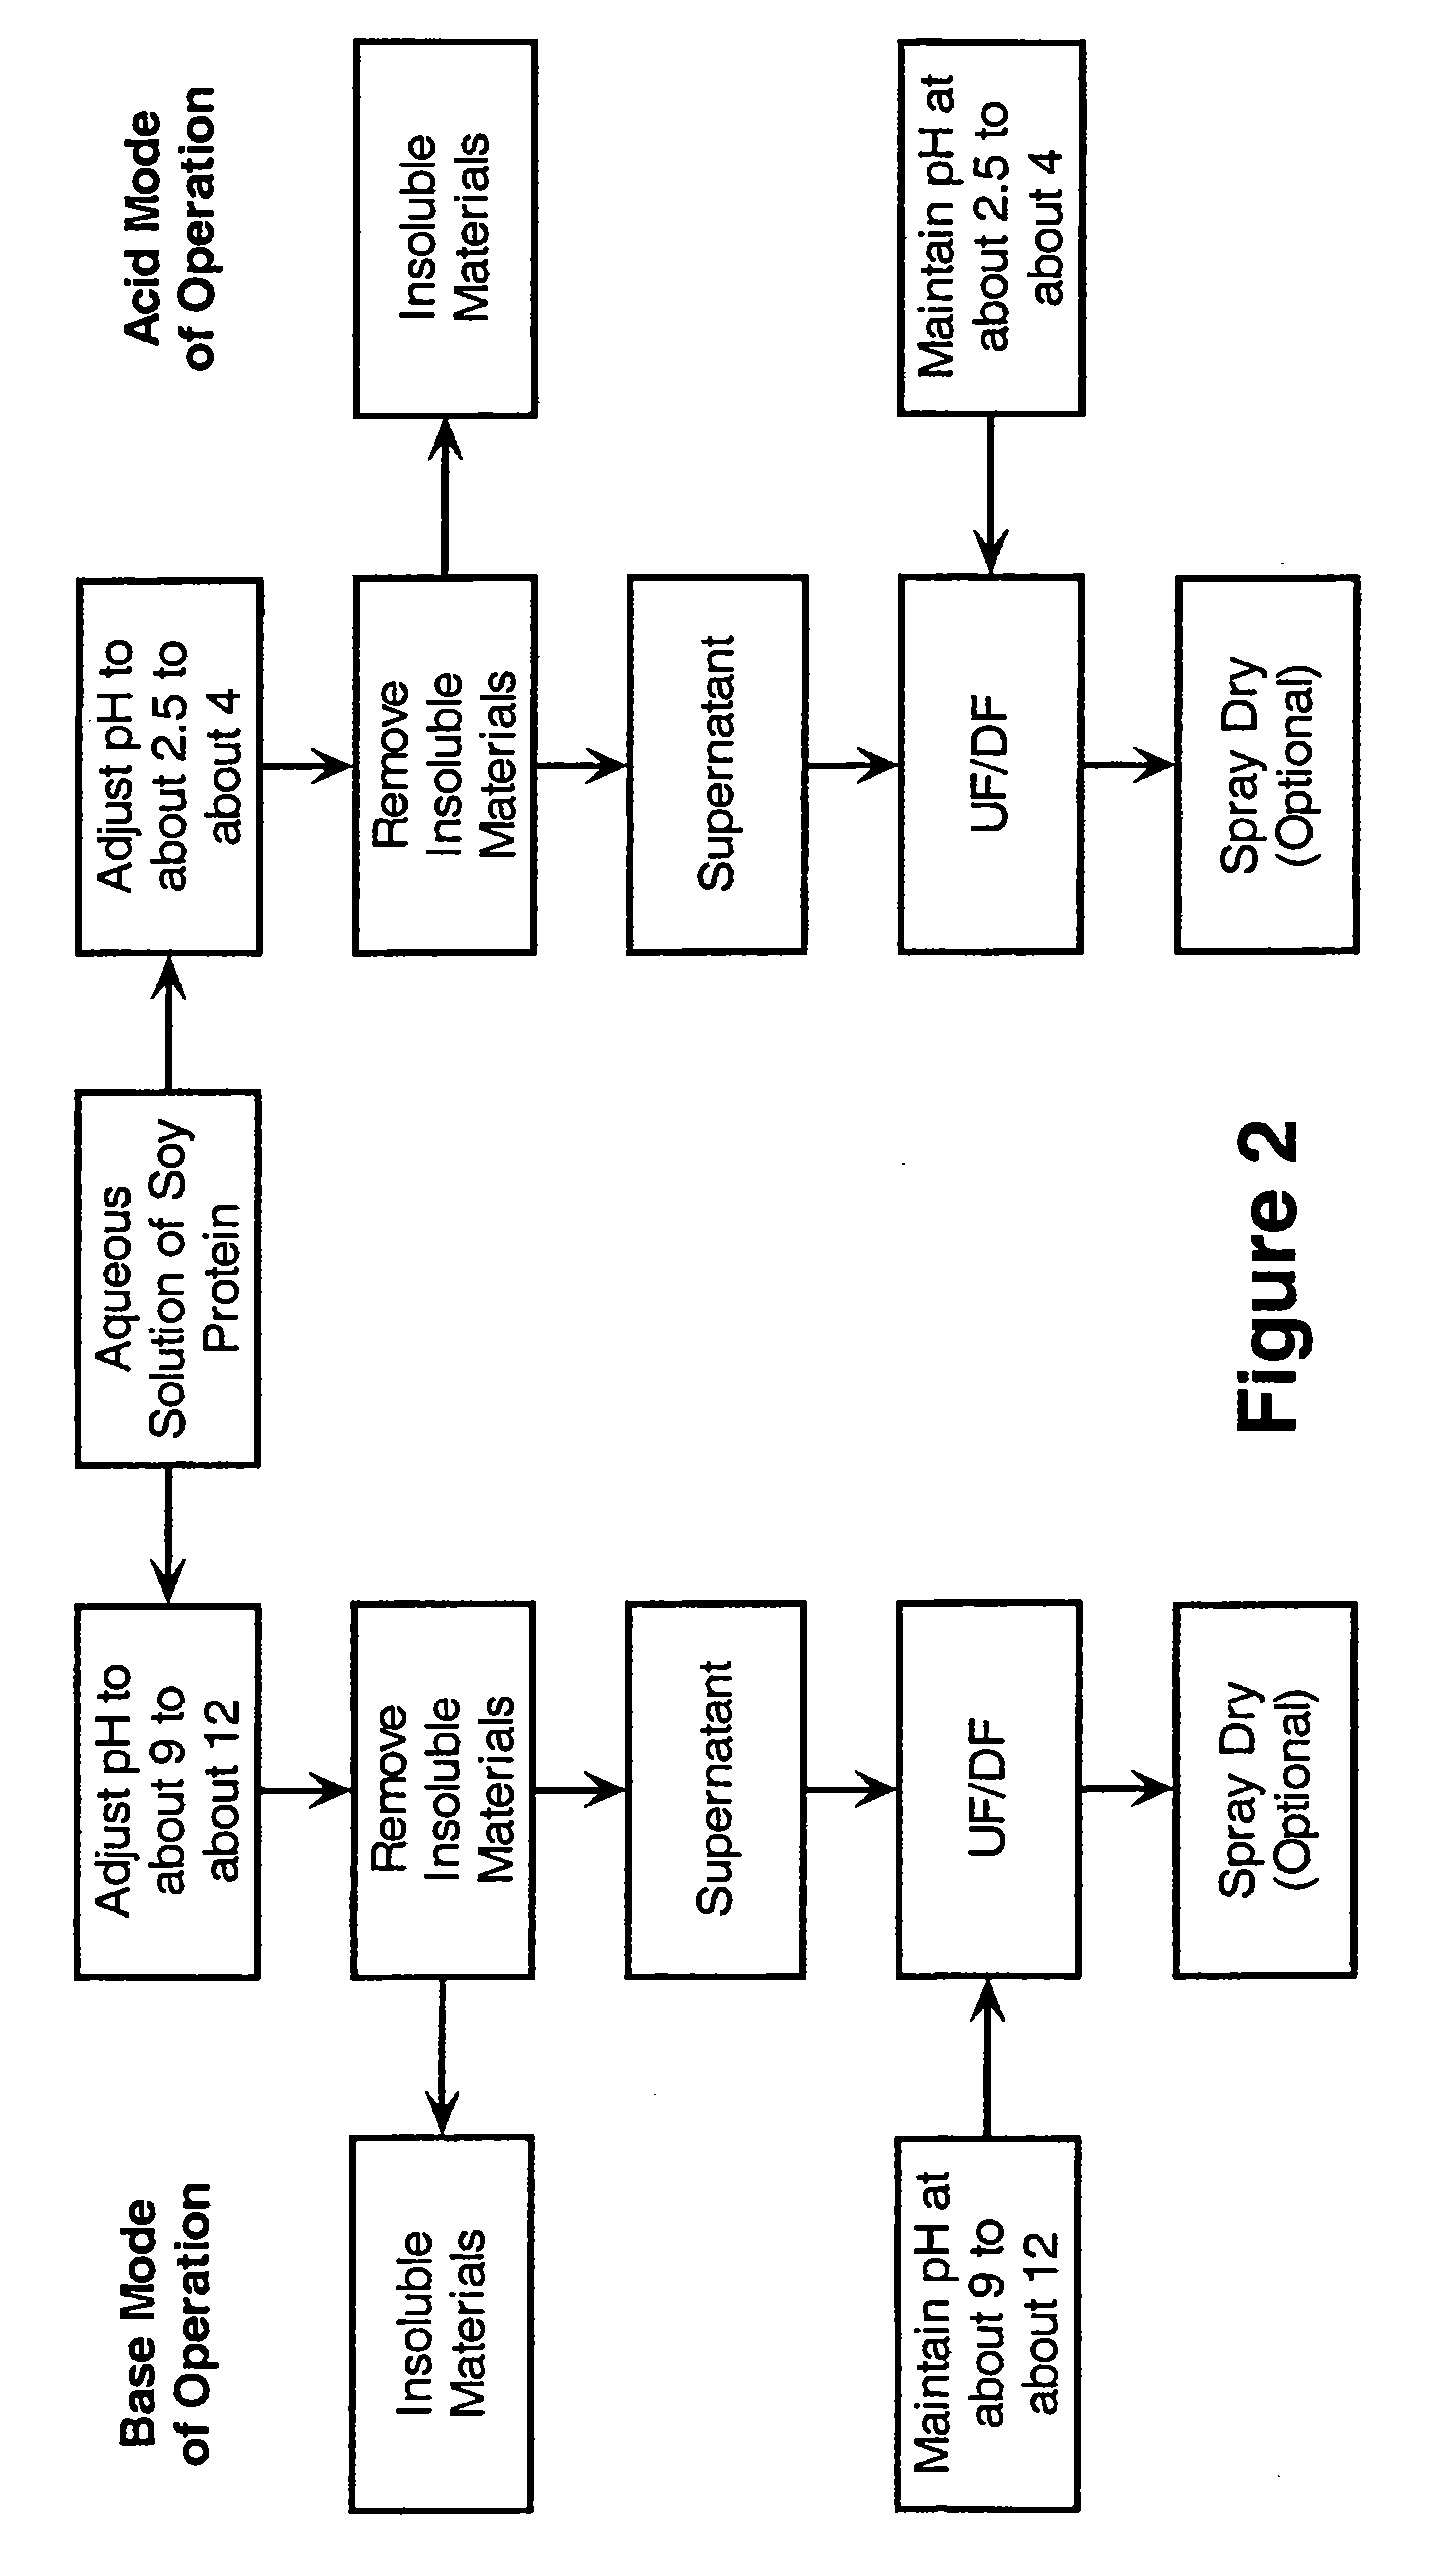 Whey-contaiing food product and method of deflavoring whey protein